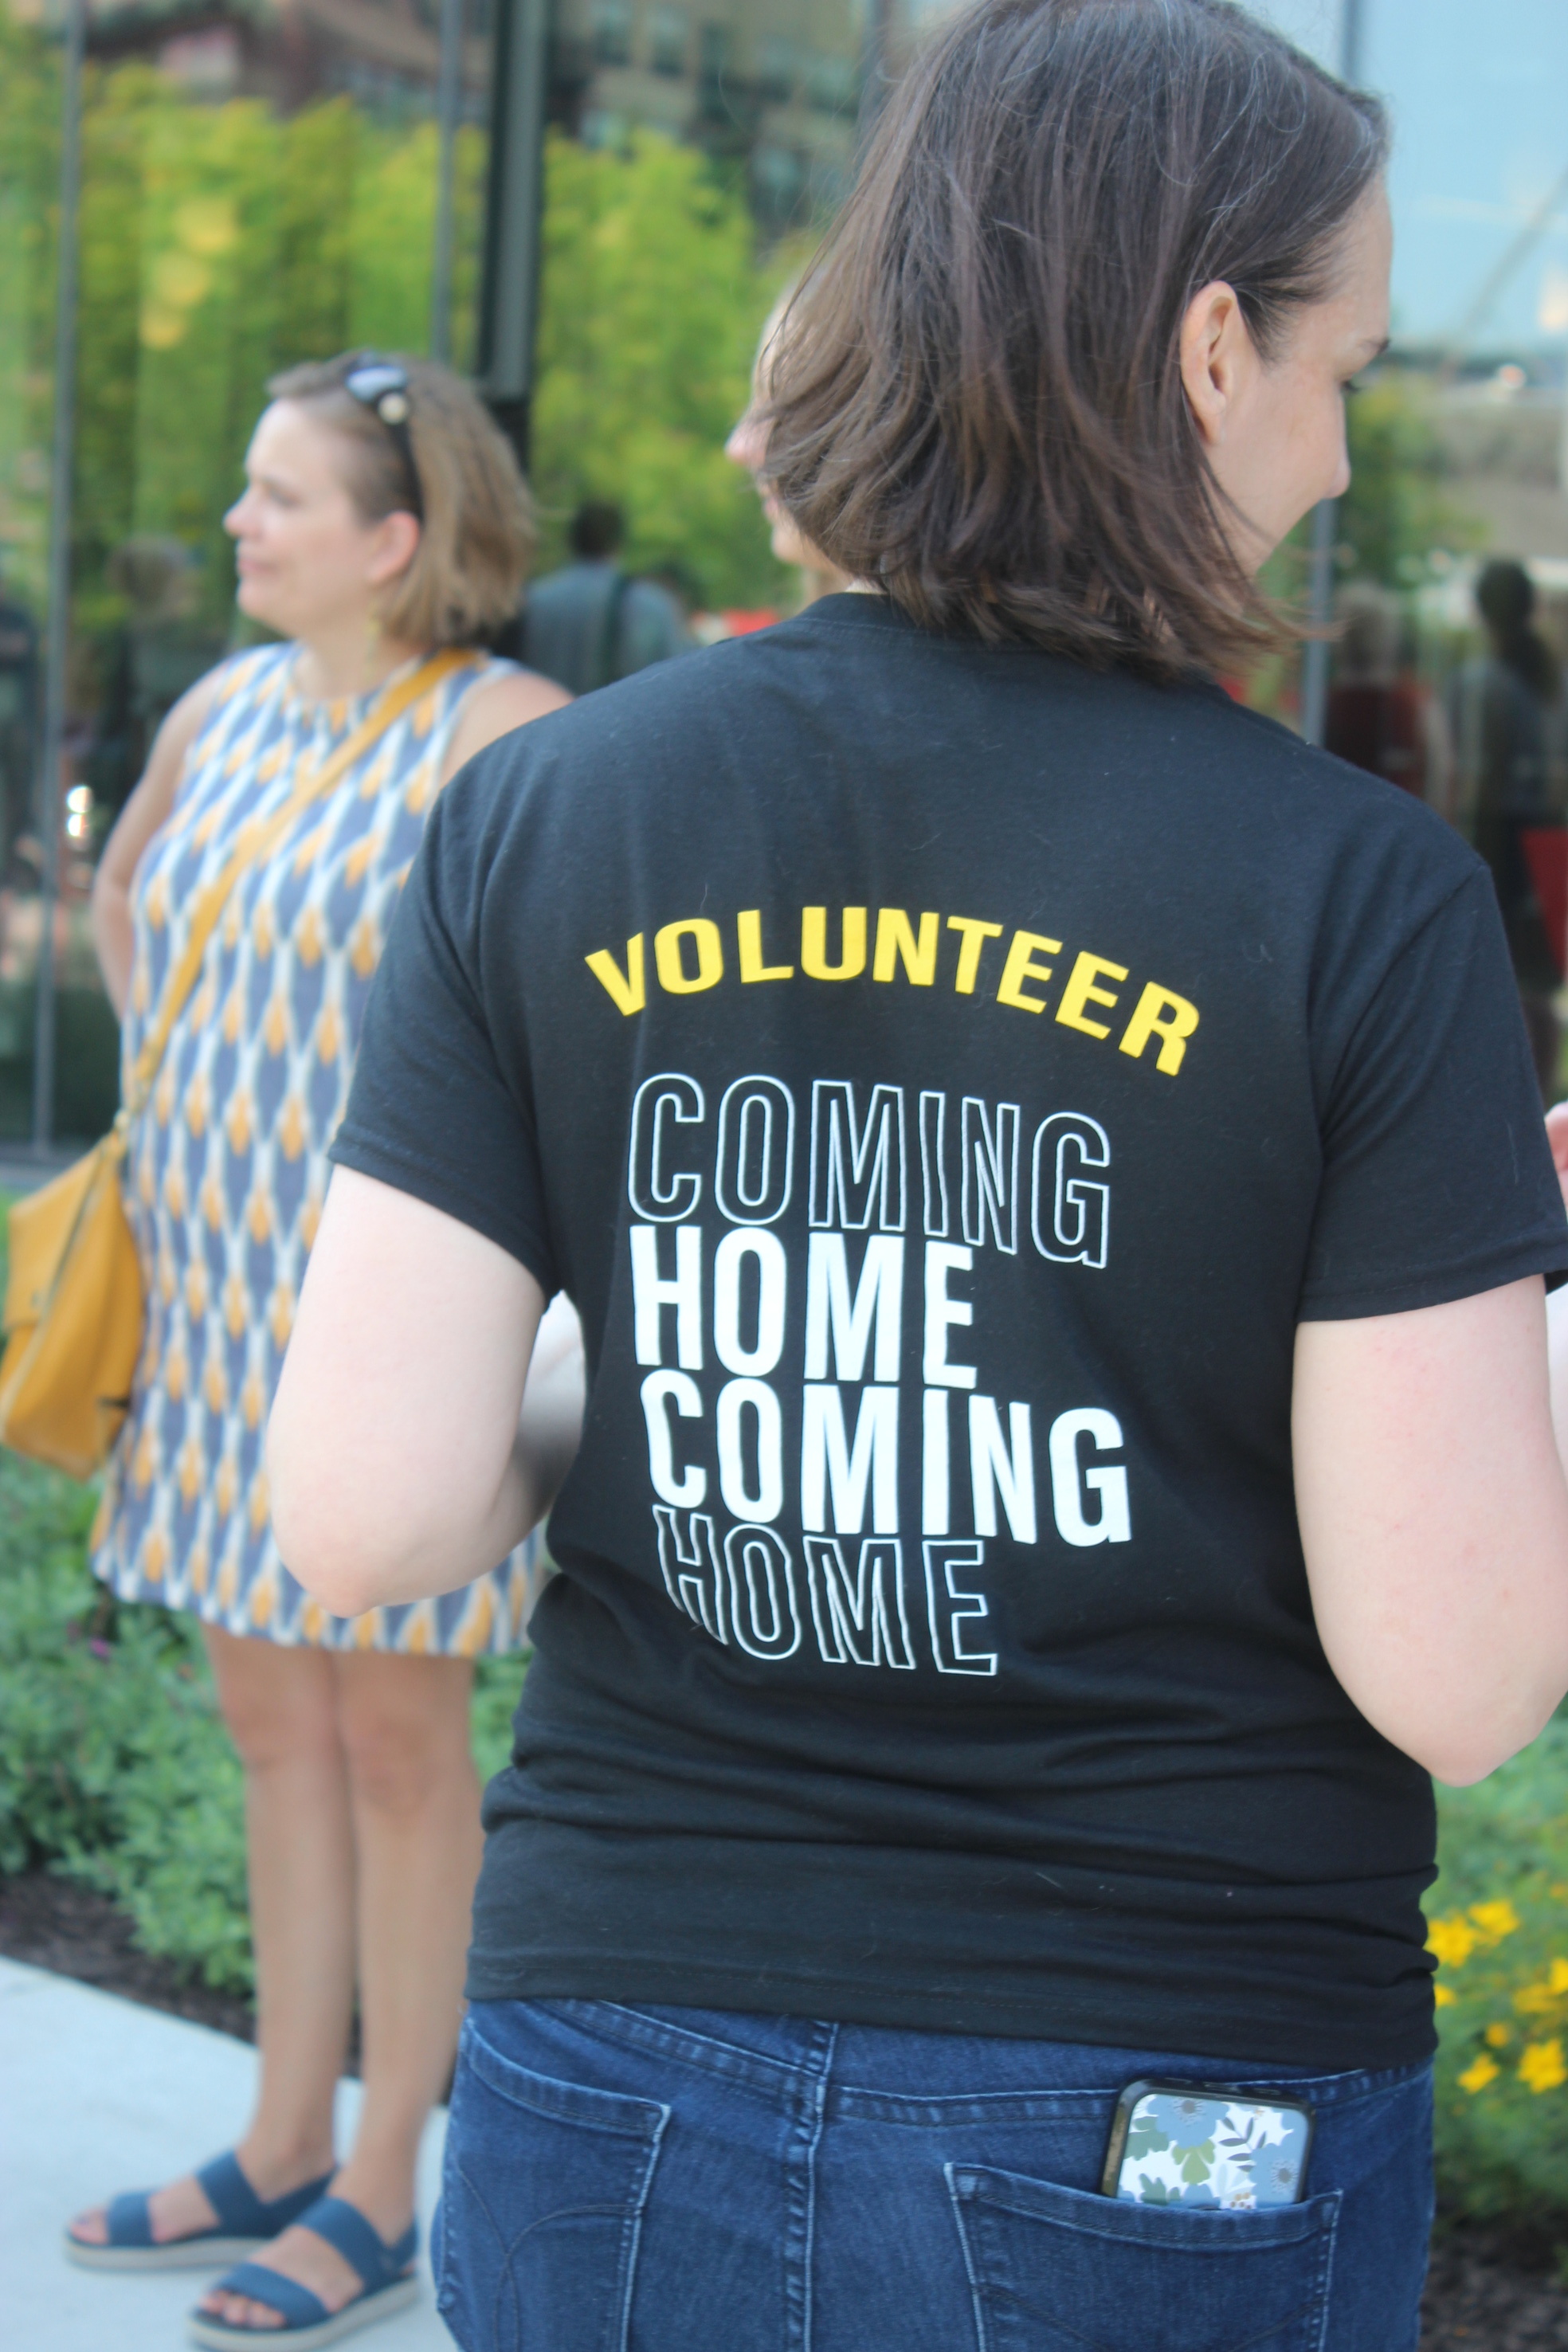 Woman with short dark hair seen from behind. She wears a t-shirt that reads "Volunteer.  Homecoming"